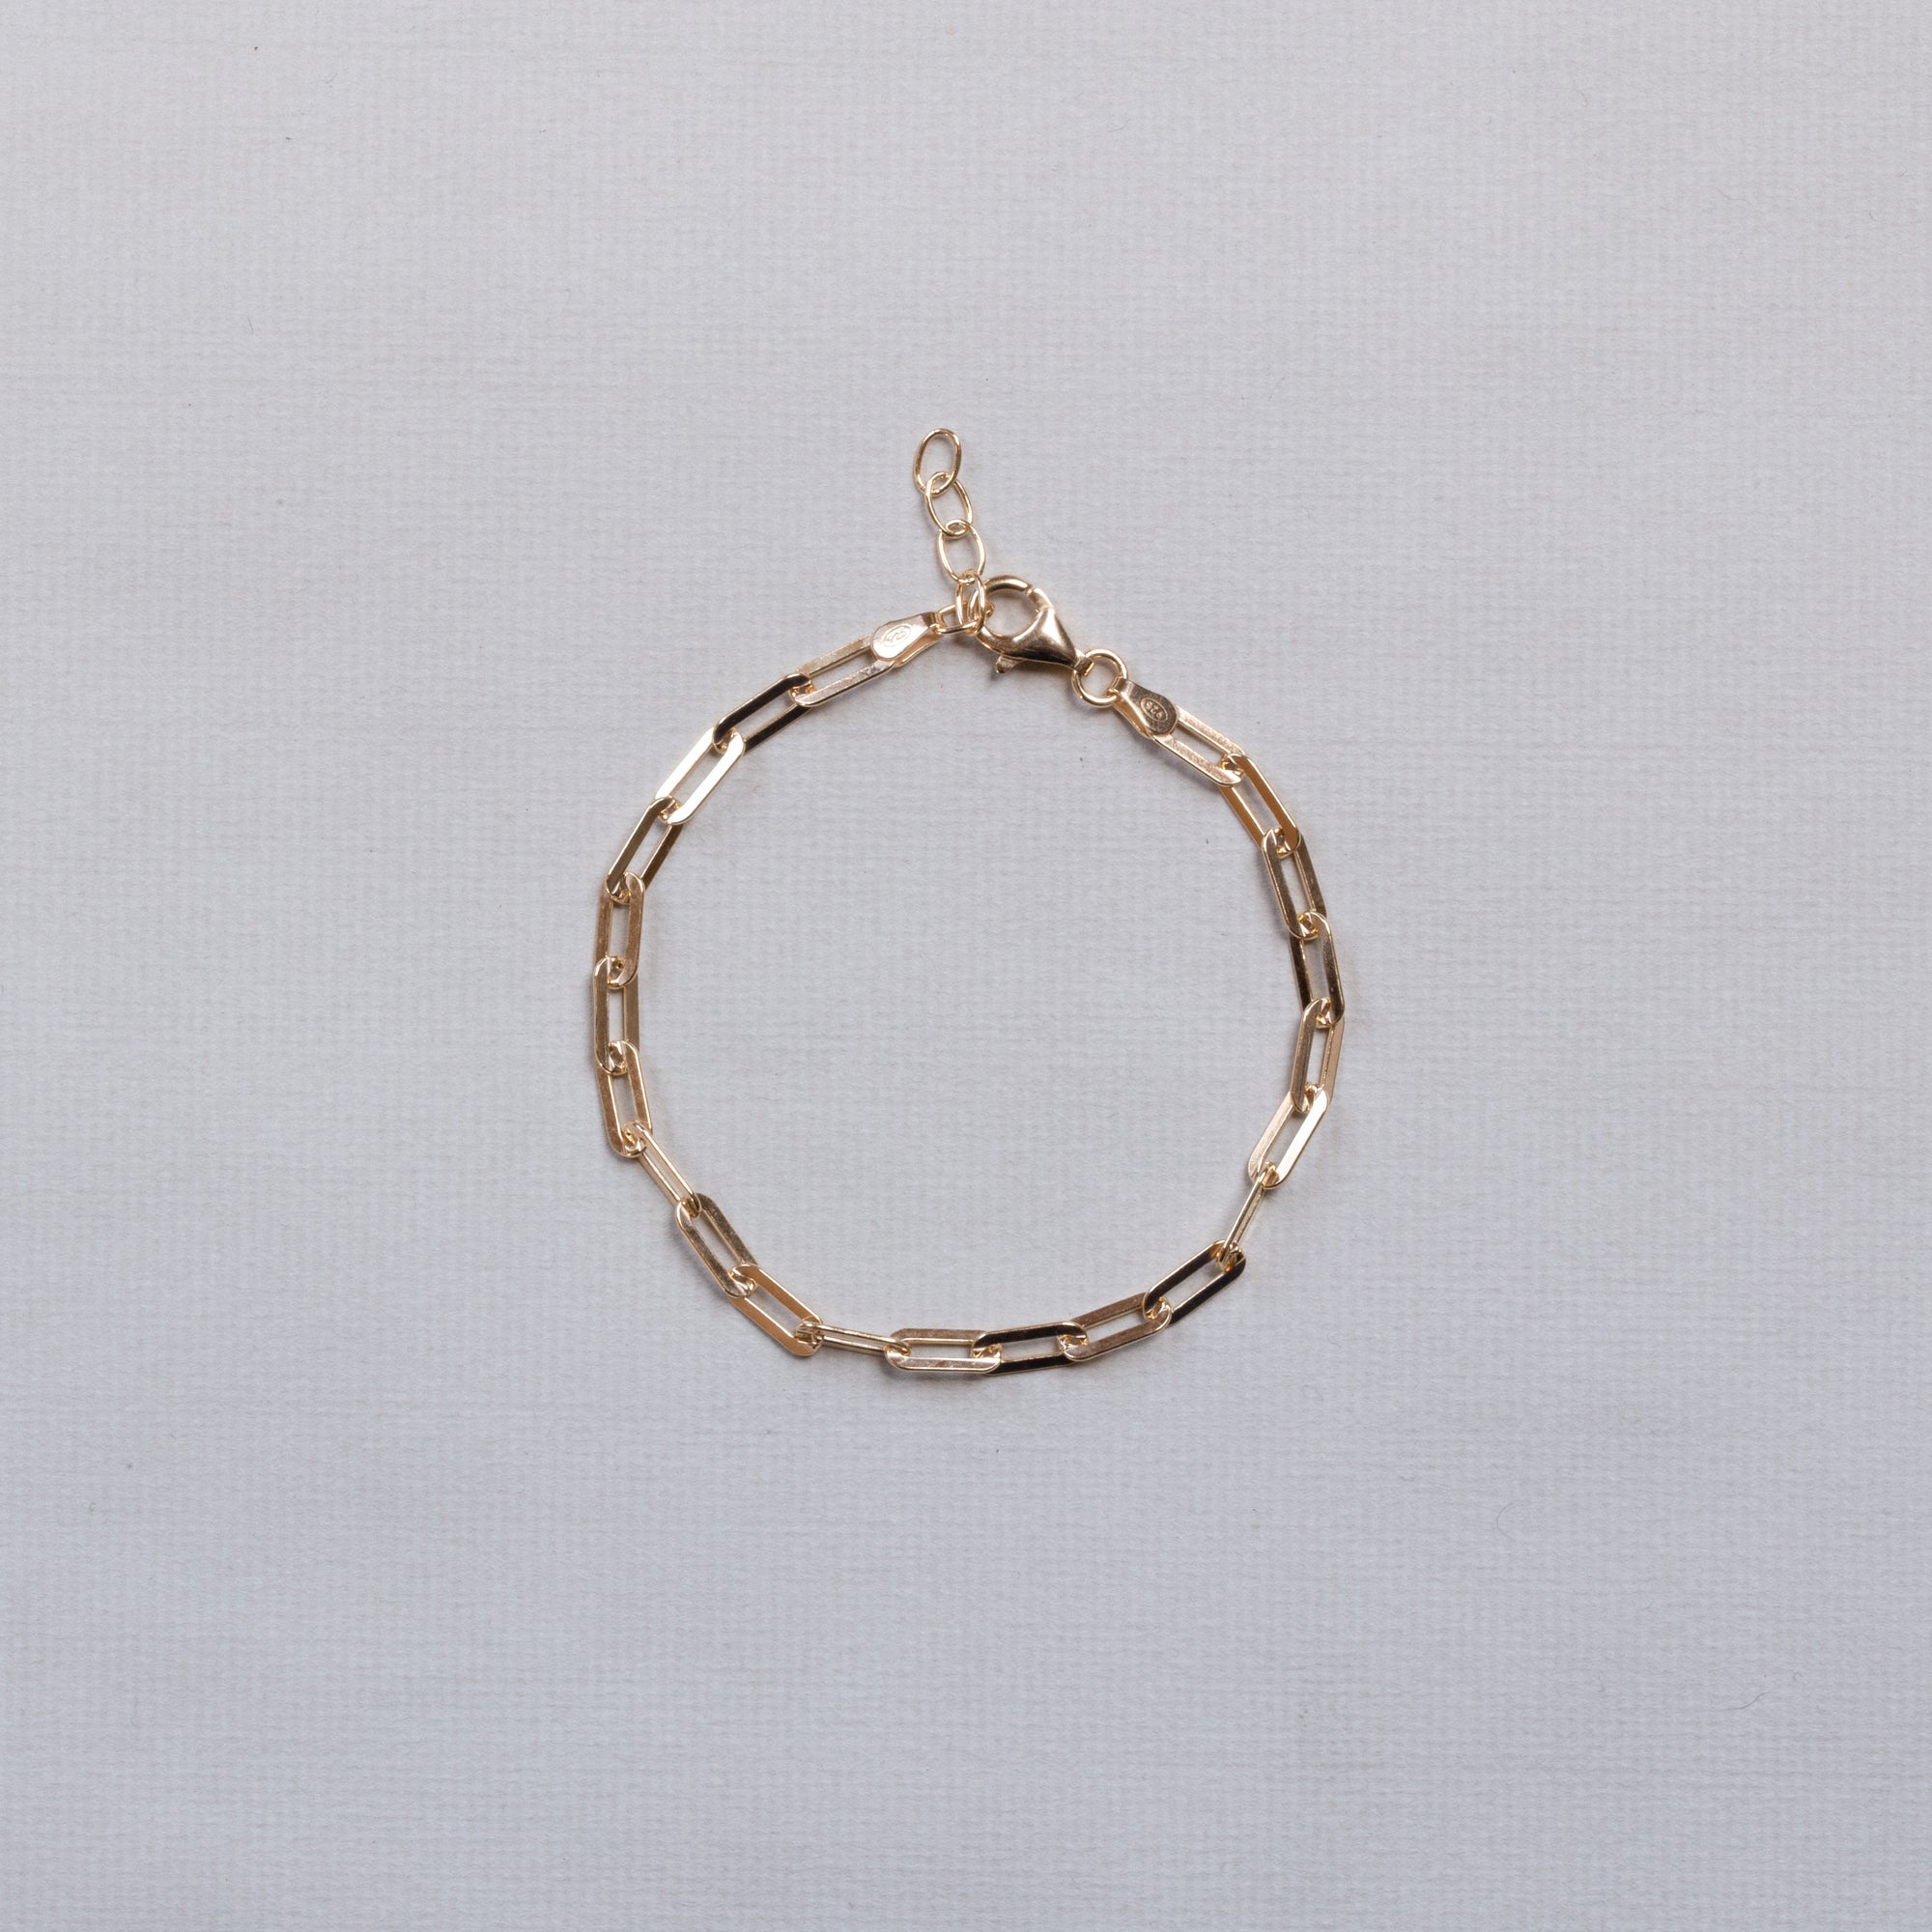 Gold-Plated Silver Chain Bracelet